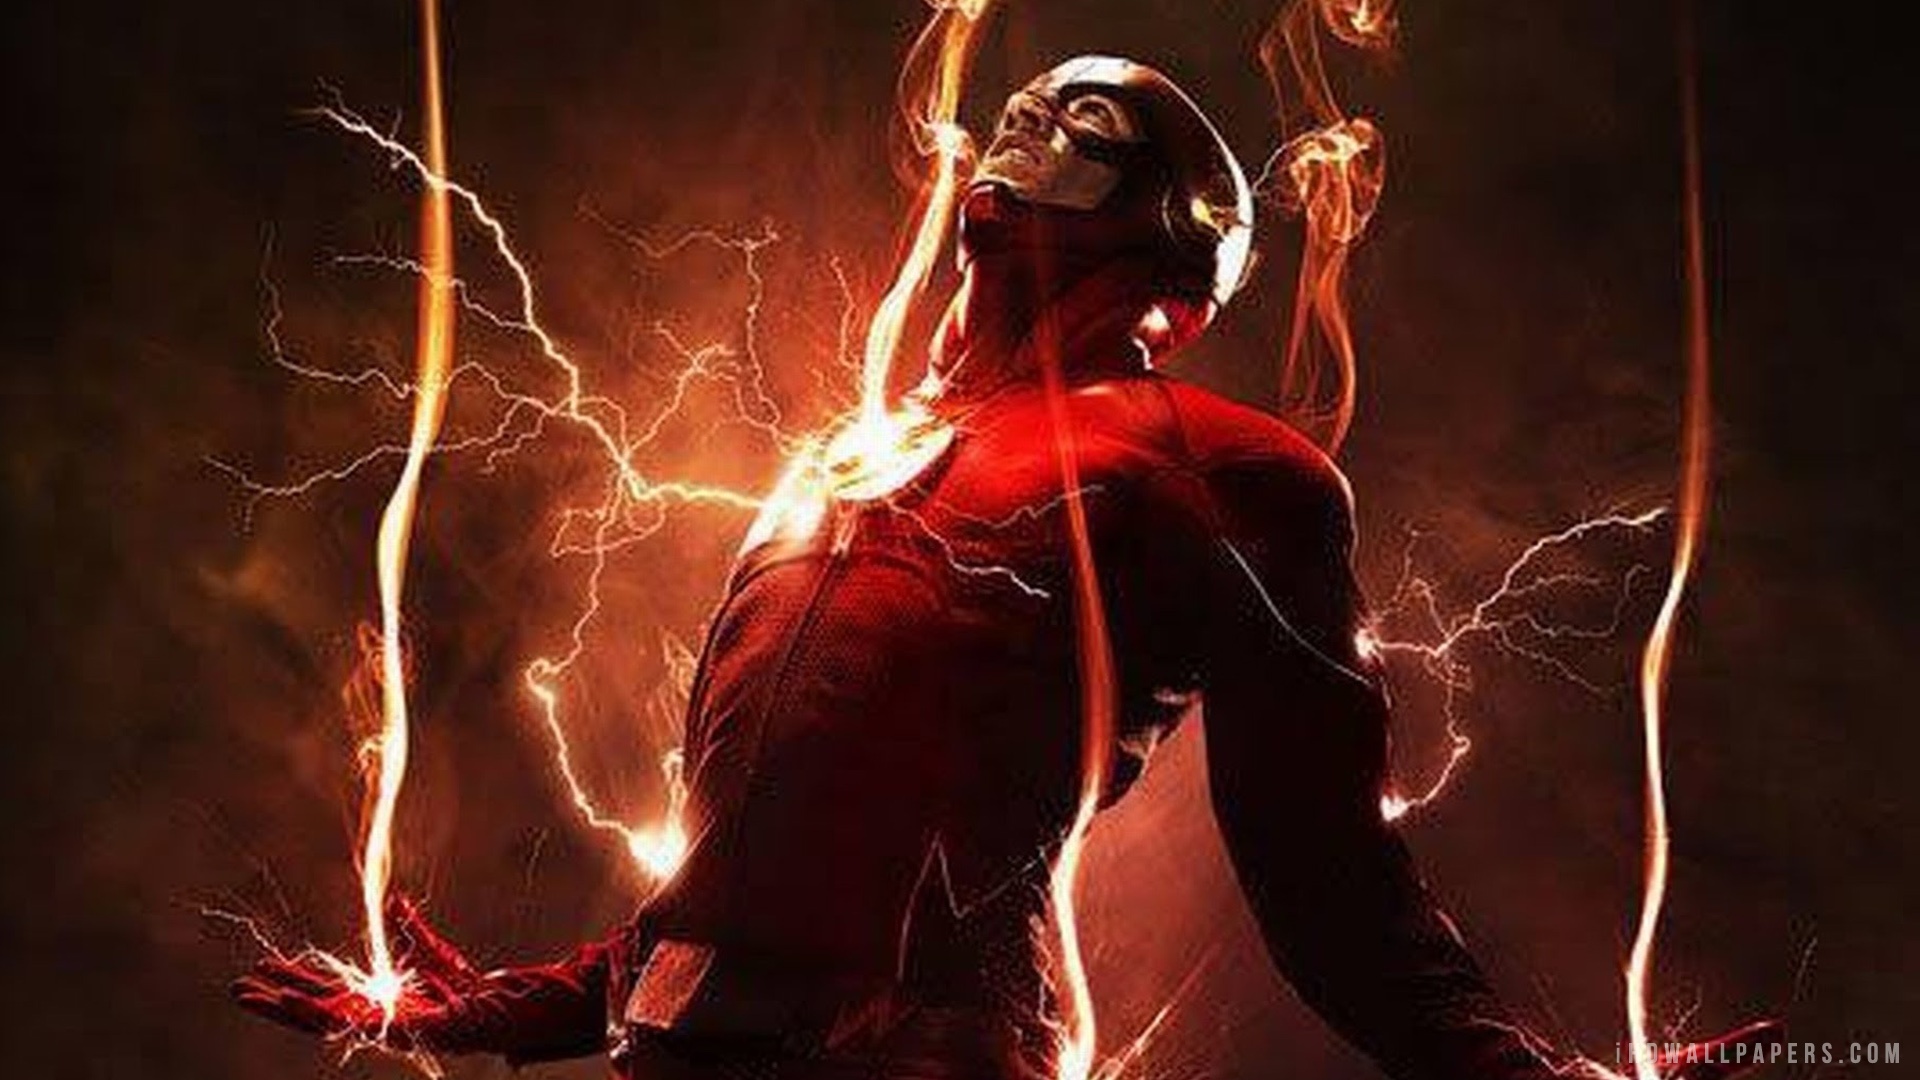 The Flash 2016 HD Wallpaper - iHD Backgrounds